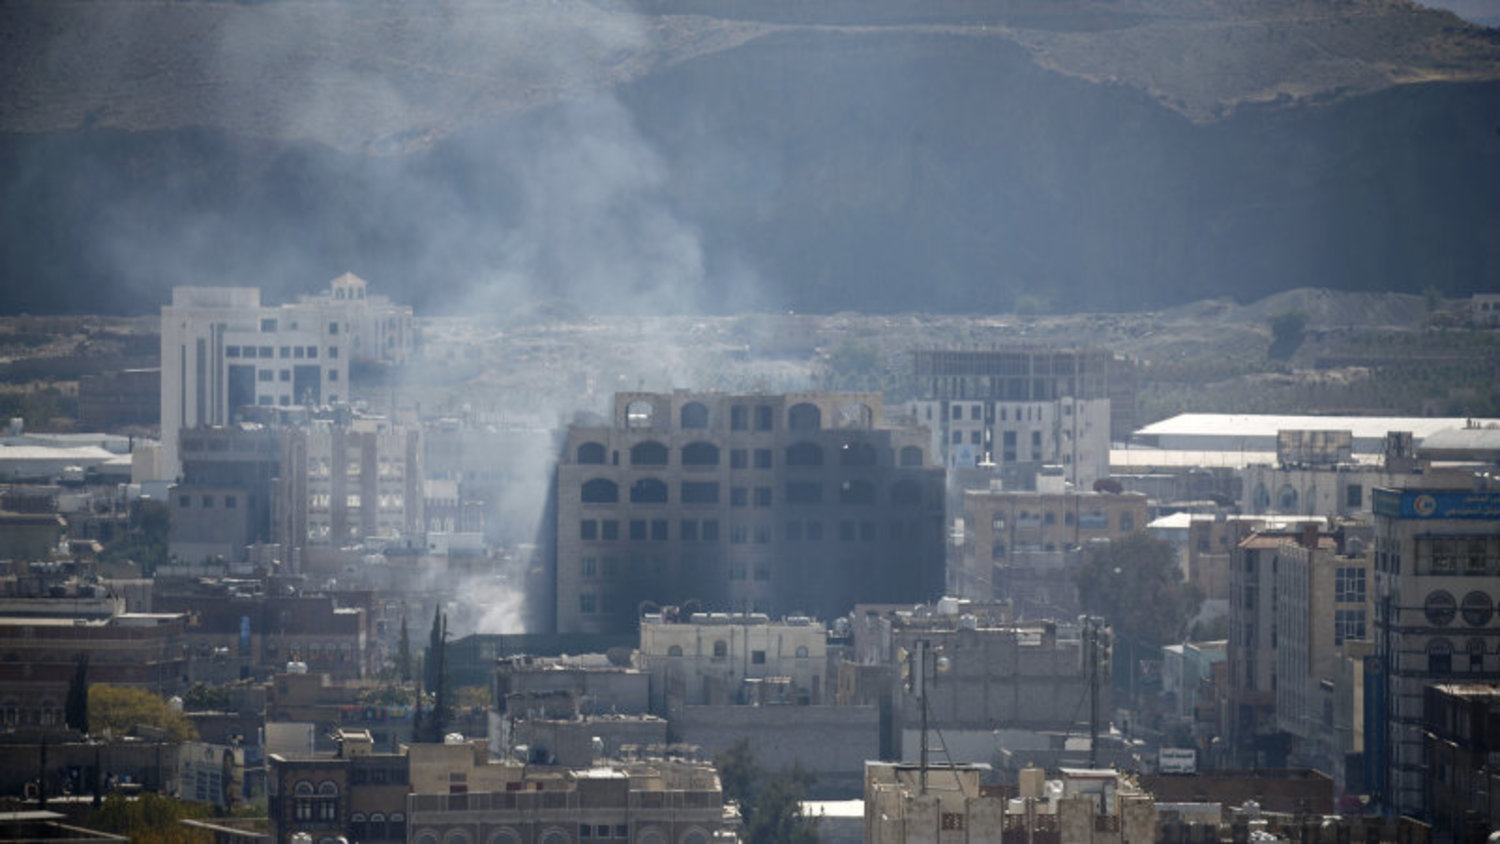 Smoke billows behind a building in the Yemeni capital Sana’a on Sunday, during clashes between Houthis and supporters of Yemeni ex-President Ali Abdullah Saleh. (AFP)